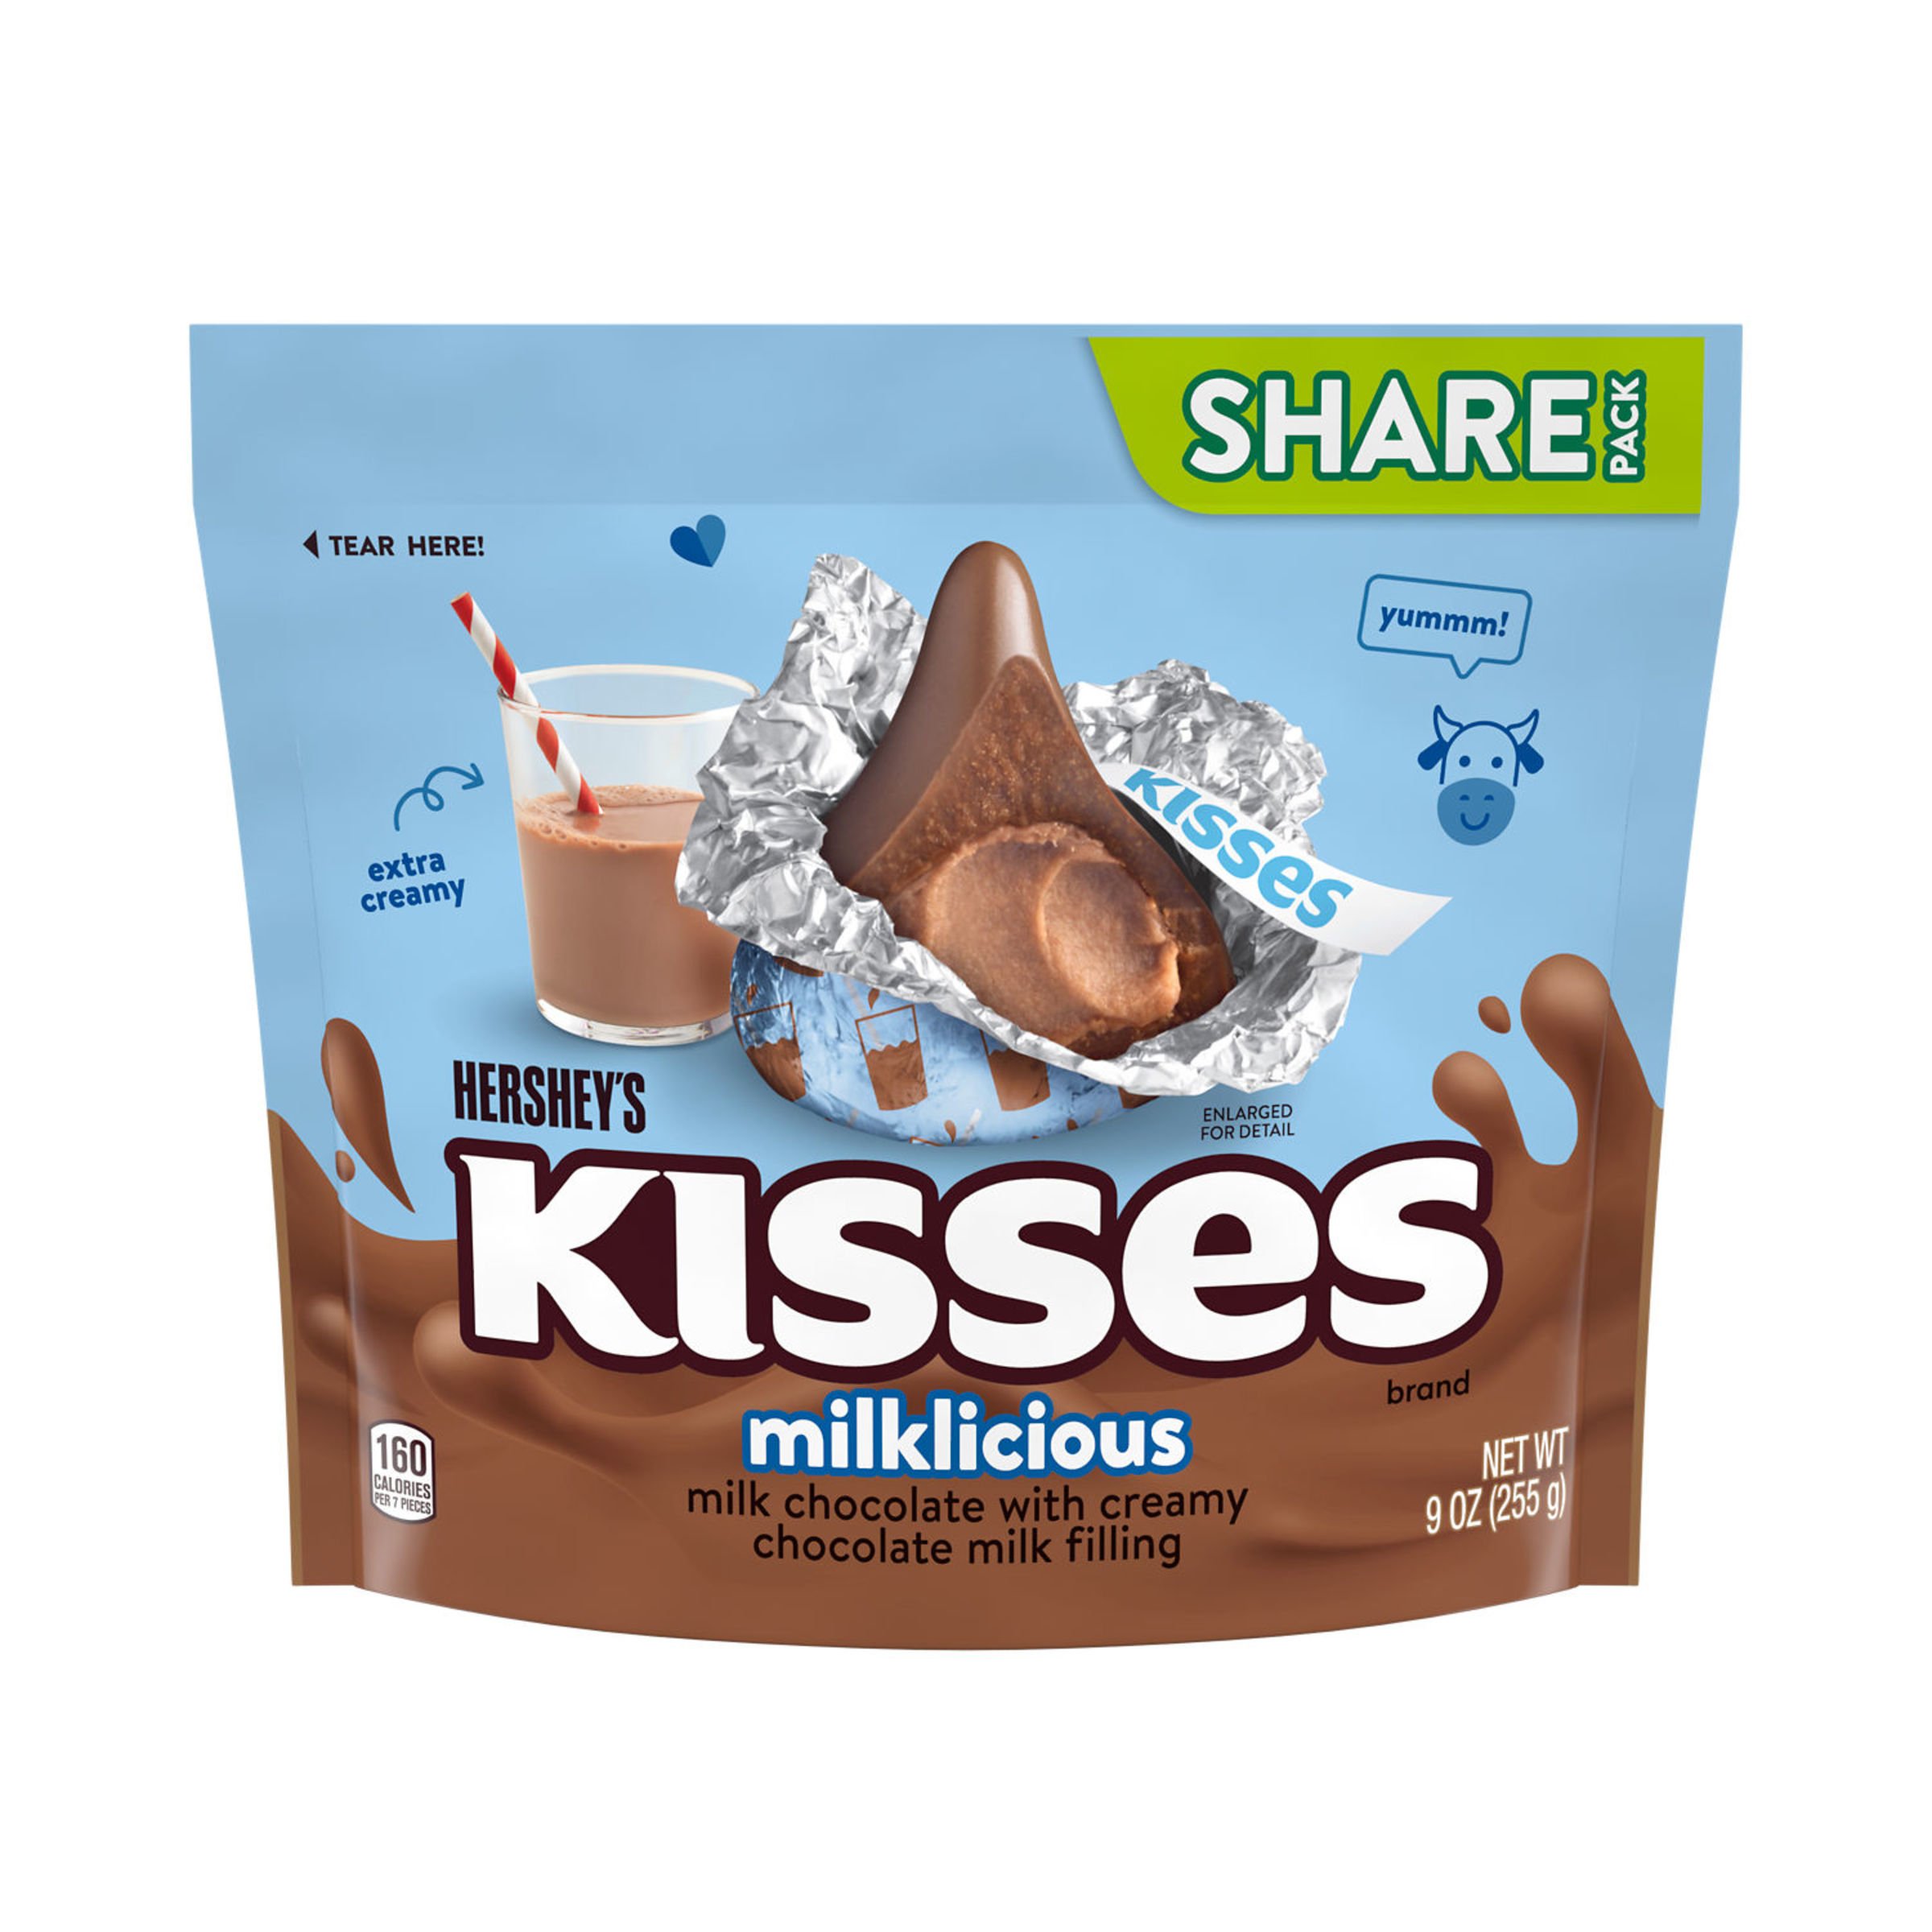 Hershey's Kisses Milklicious Milk Chocolate Candy - Share Pack - Shop ...